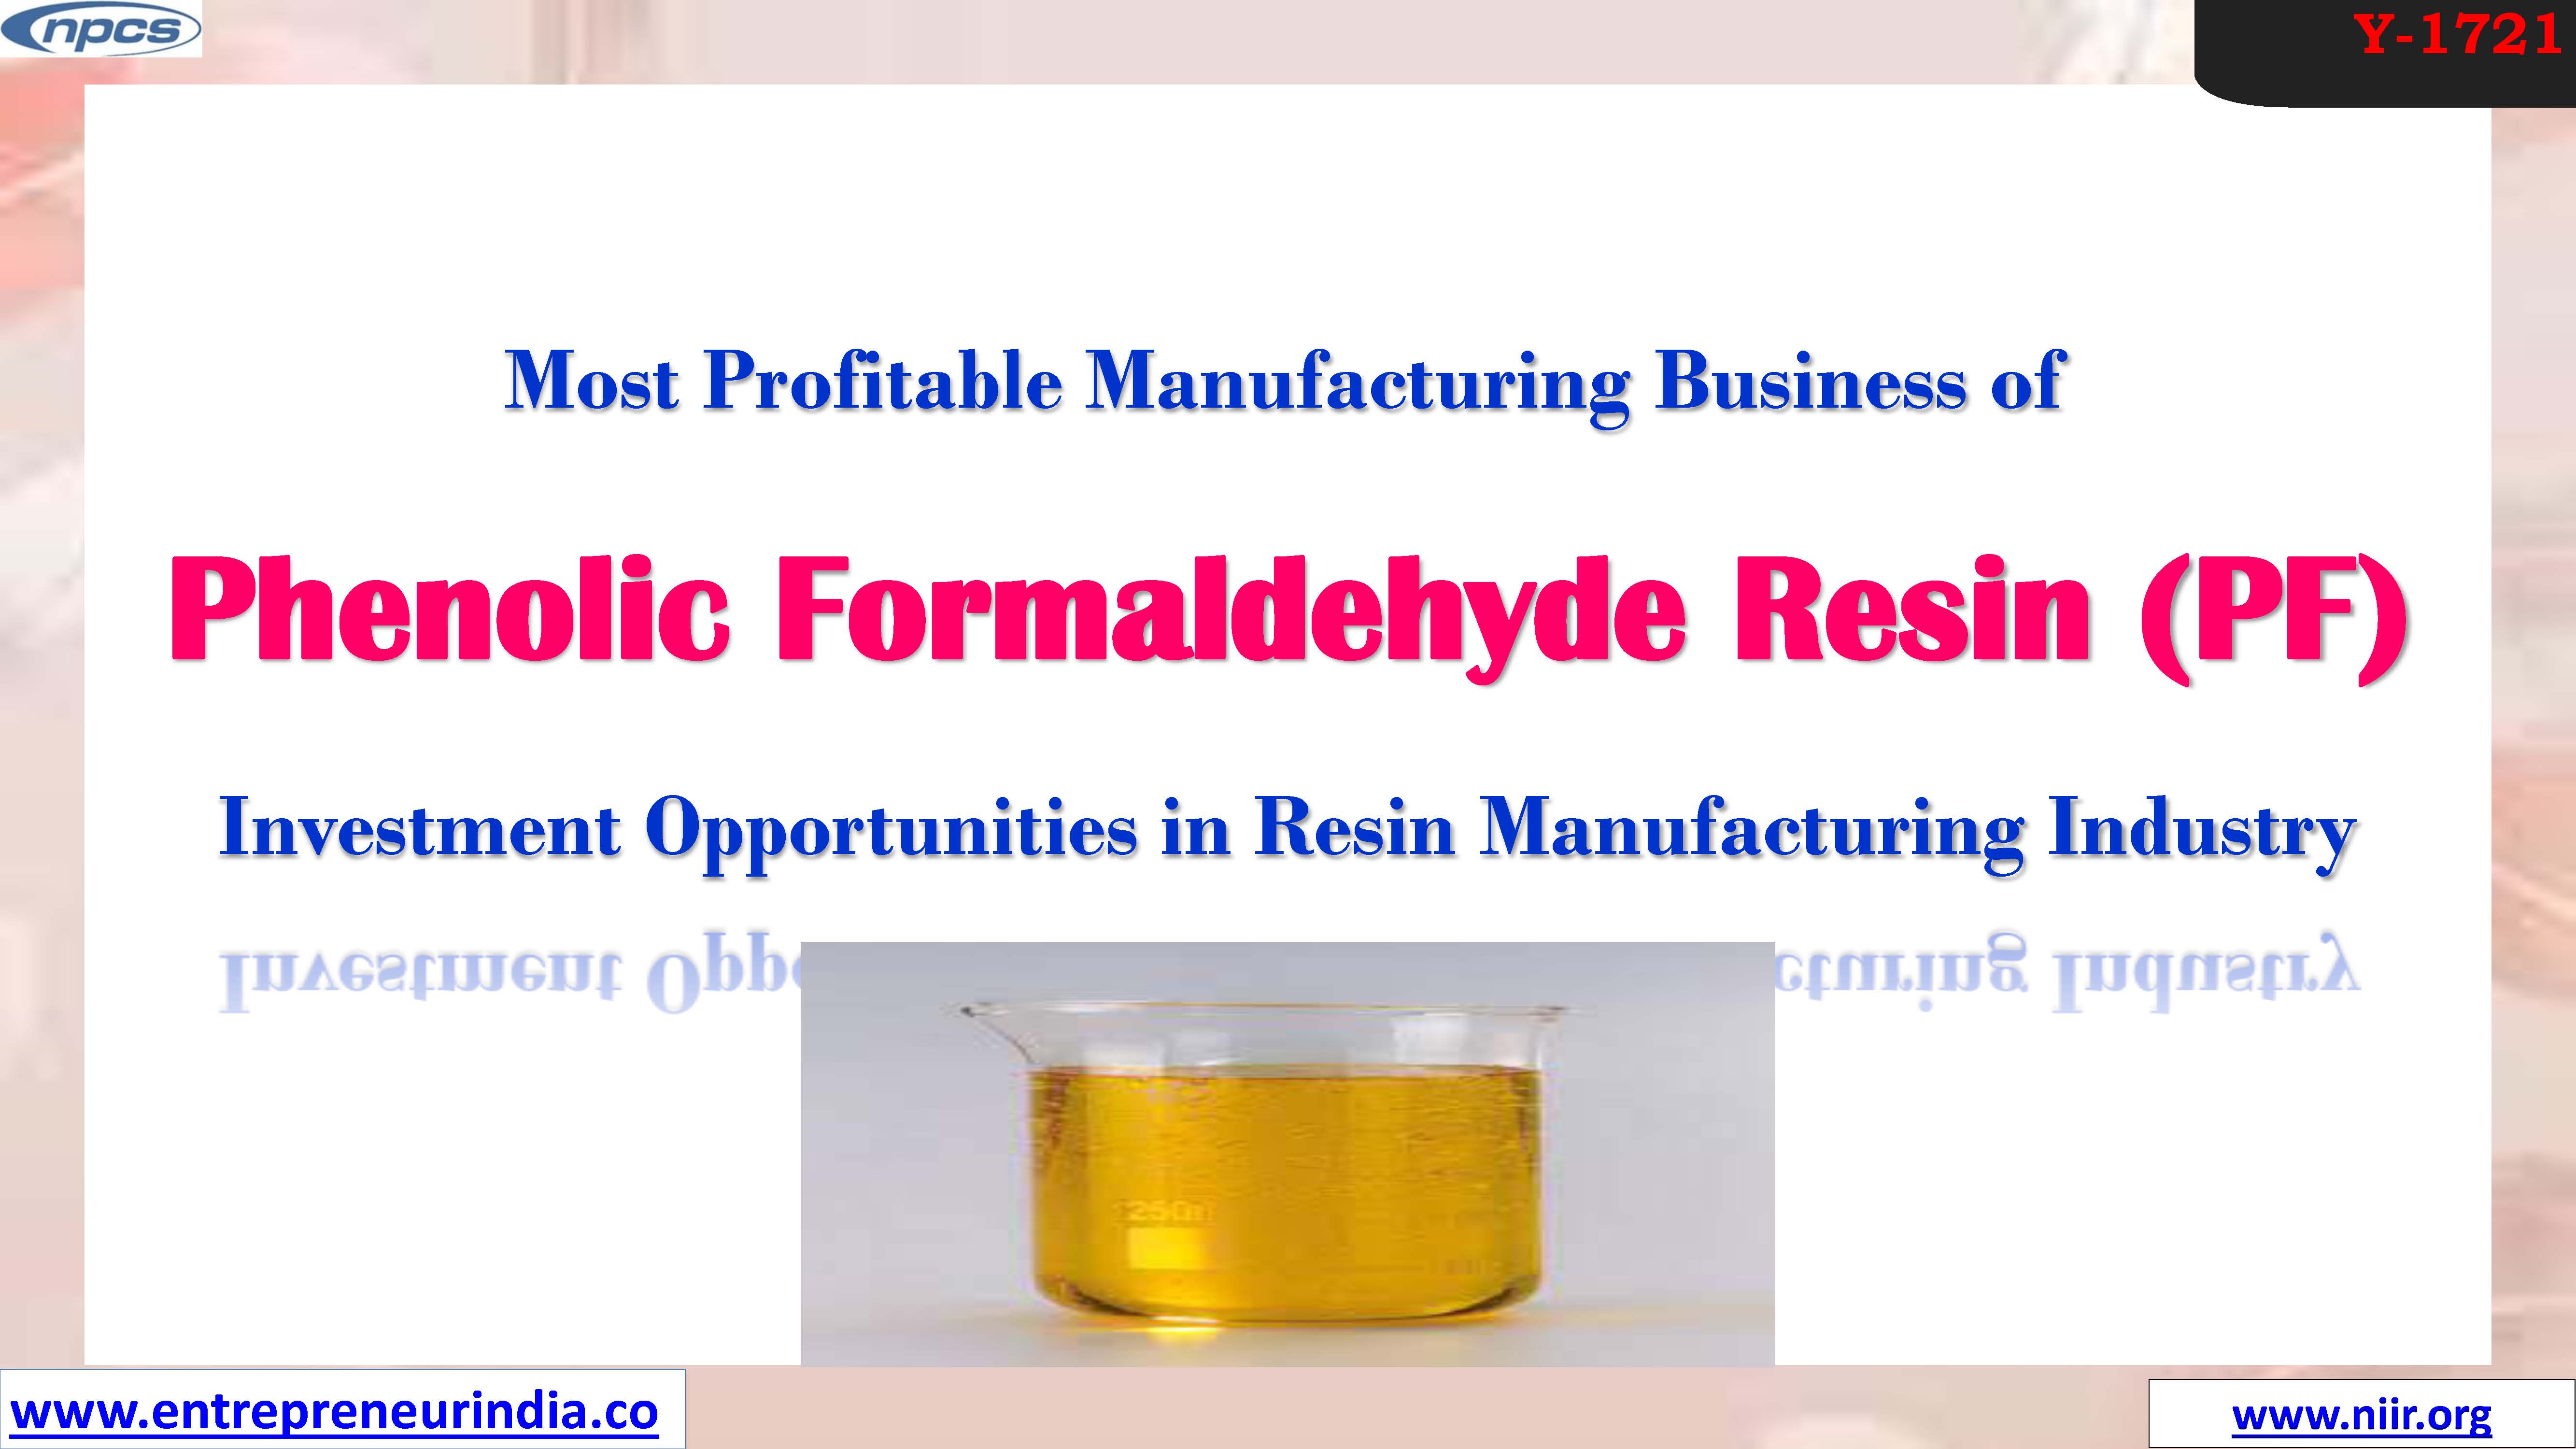 Most Profitable Manufacturing Business of Phenolic Formaldehyde Resin PF Investment Opportunities in Resin Manufacturing Industry